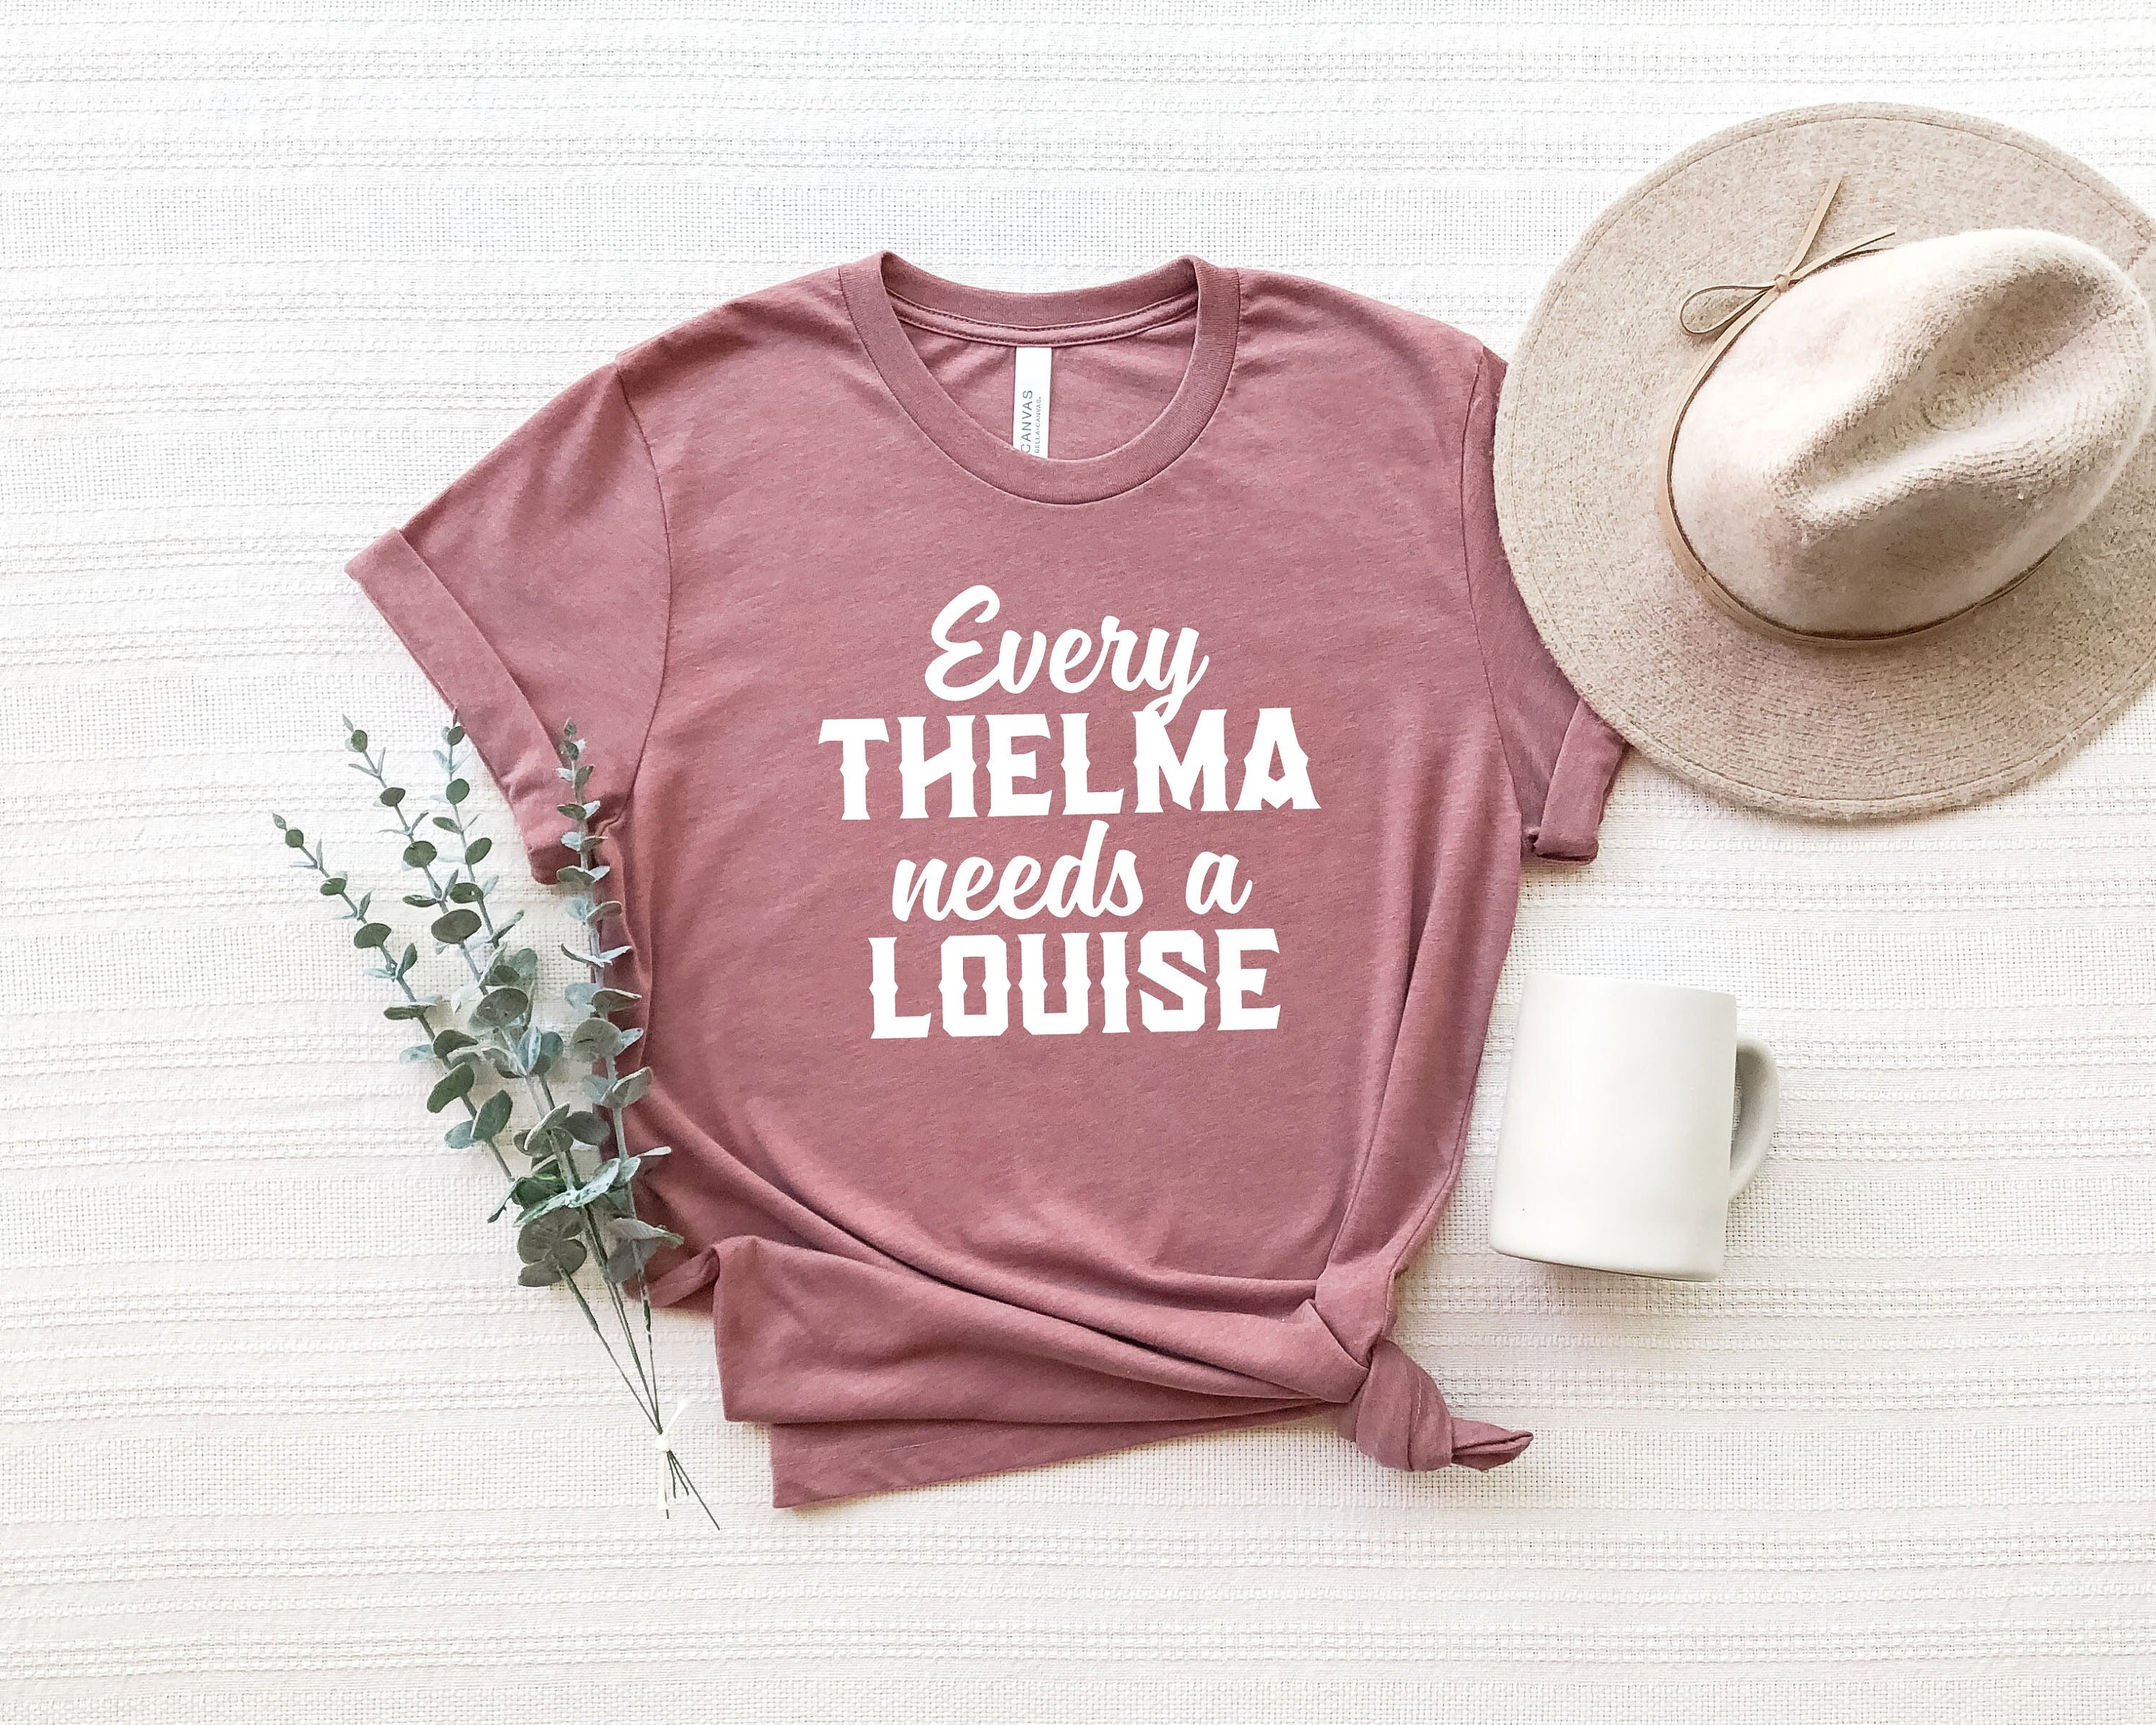  Thelma and Louise, Best Friends Hoodie, Every Thelma Needs a  Louise Hooded Shirt, Ride or Die, Matching Friends, Best Friend Gift,  Bestie Gift, Gift for Girlfriend, Gifts for Couples : Handmade